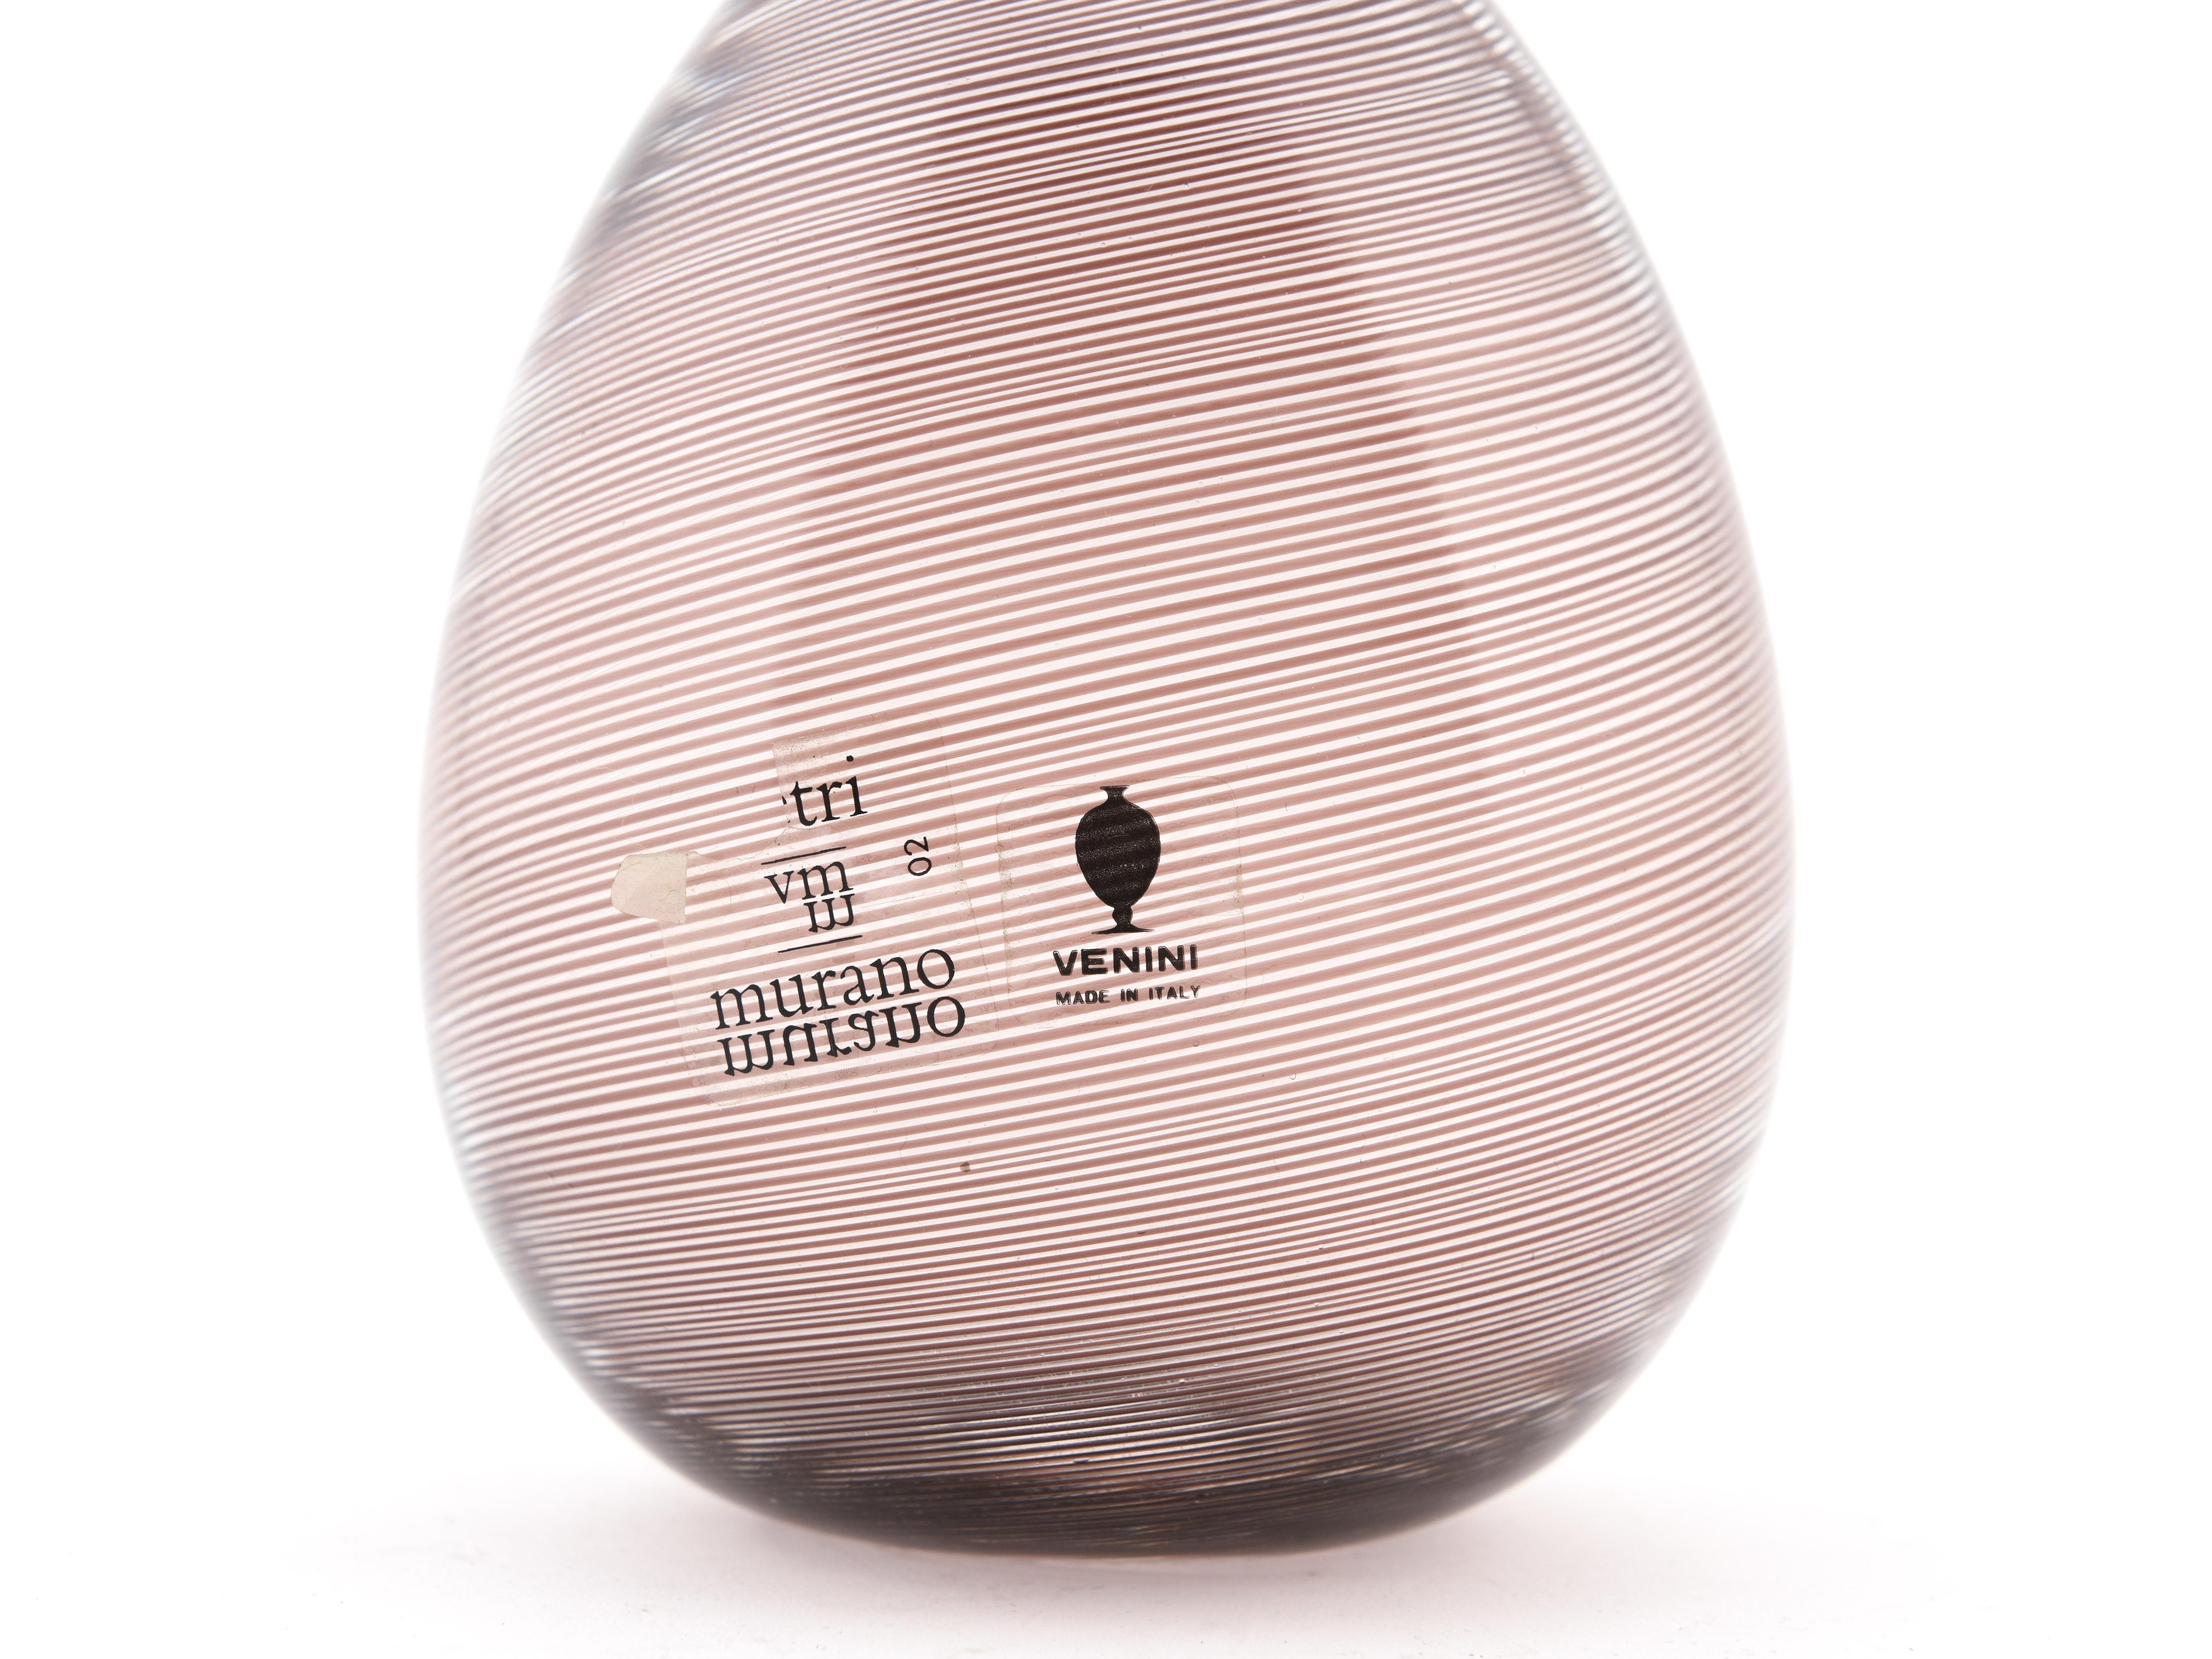 Beautiful blown glass egg(soffiato a mano), from the Venini collection Filigrane, in shades of purple and pink. 
This beautiful example is signed under the base.

Tapio Wirkkala is a Finnish designer and sculptor, widely considered a leading figure